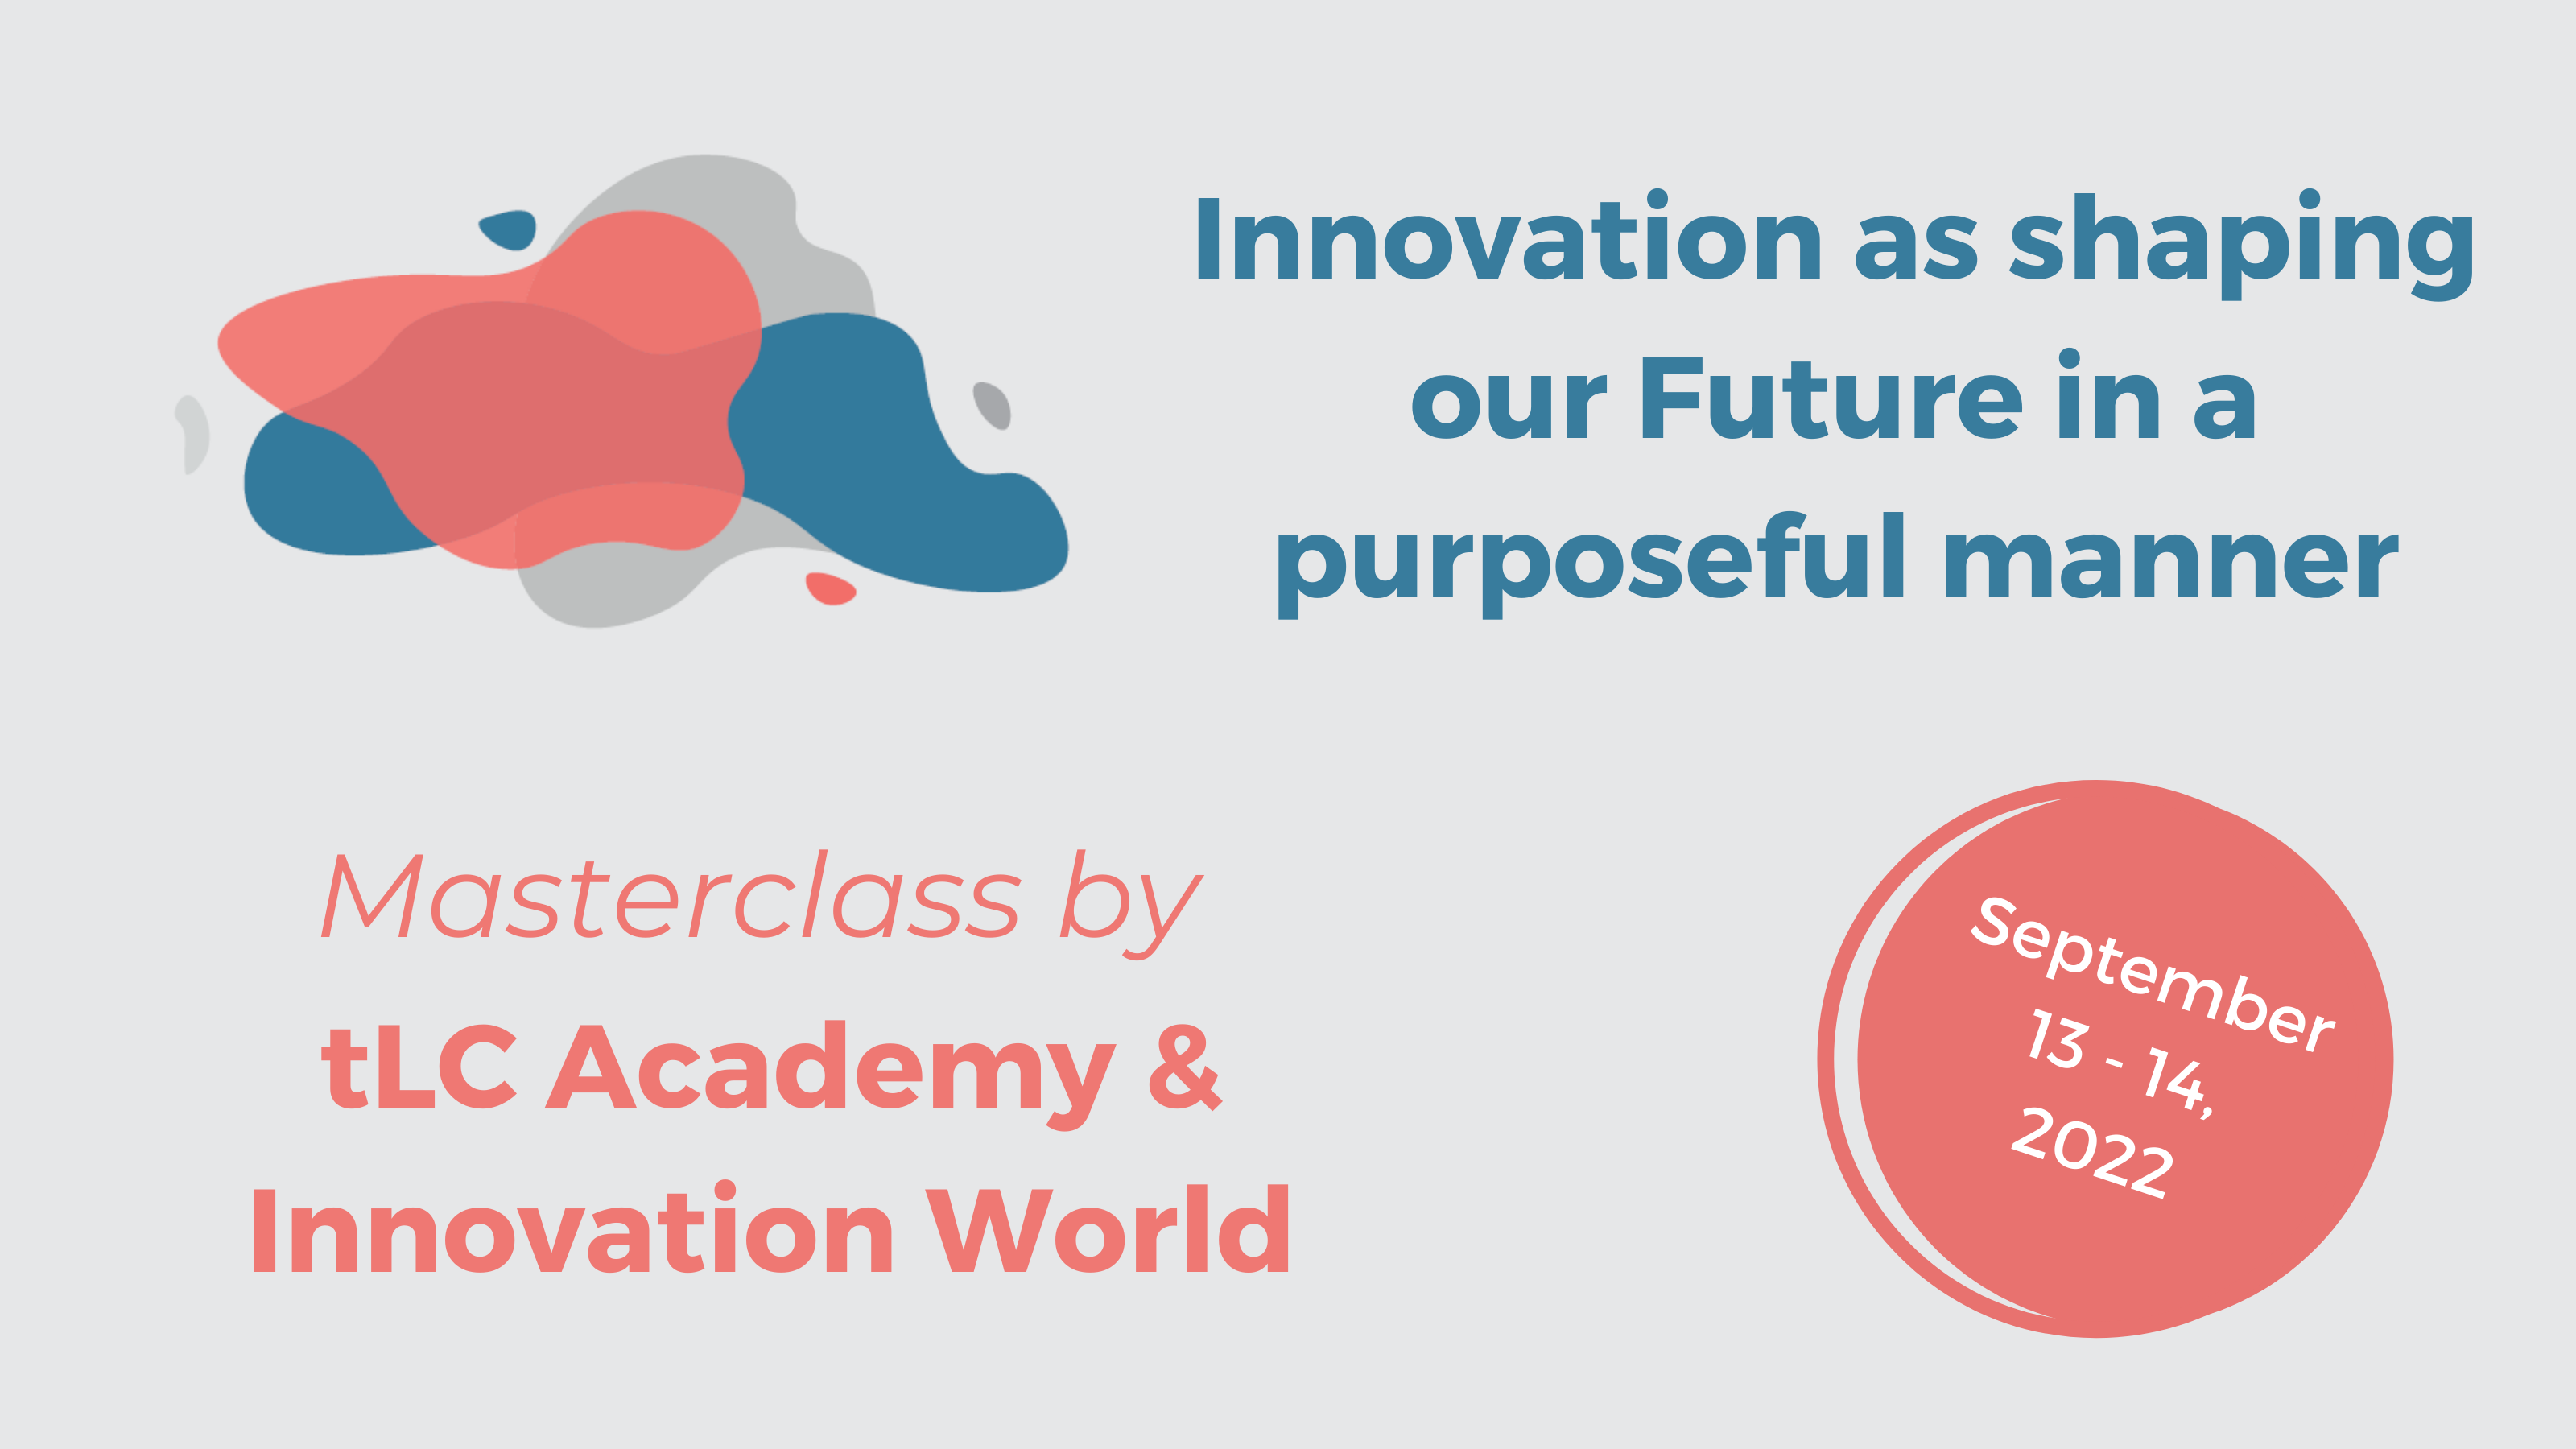 Innovation Masterclass: Innovation as shaping our Future in a purposeful manner organized by Innovation World Switzerland